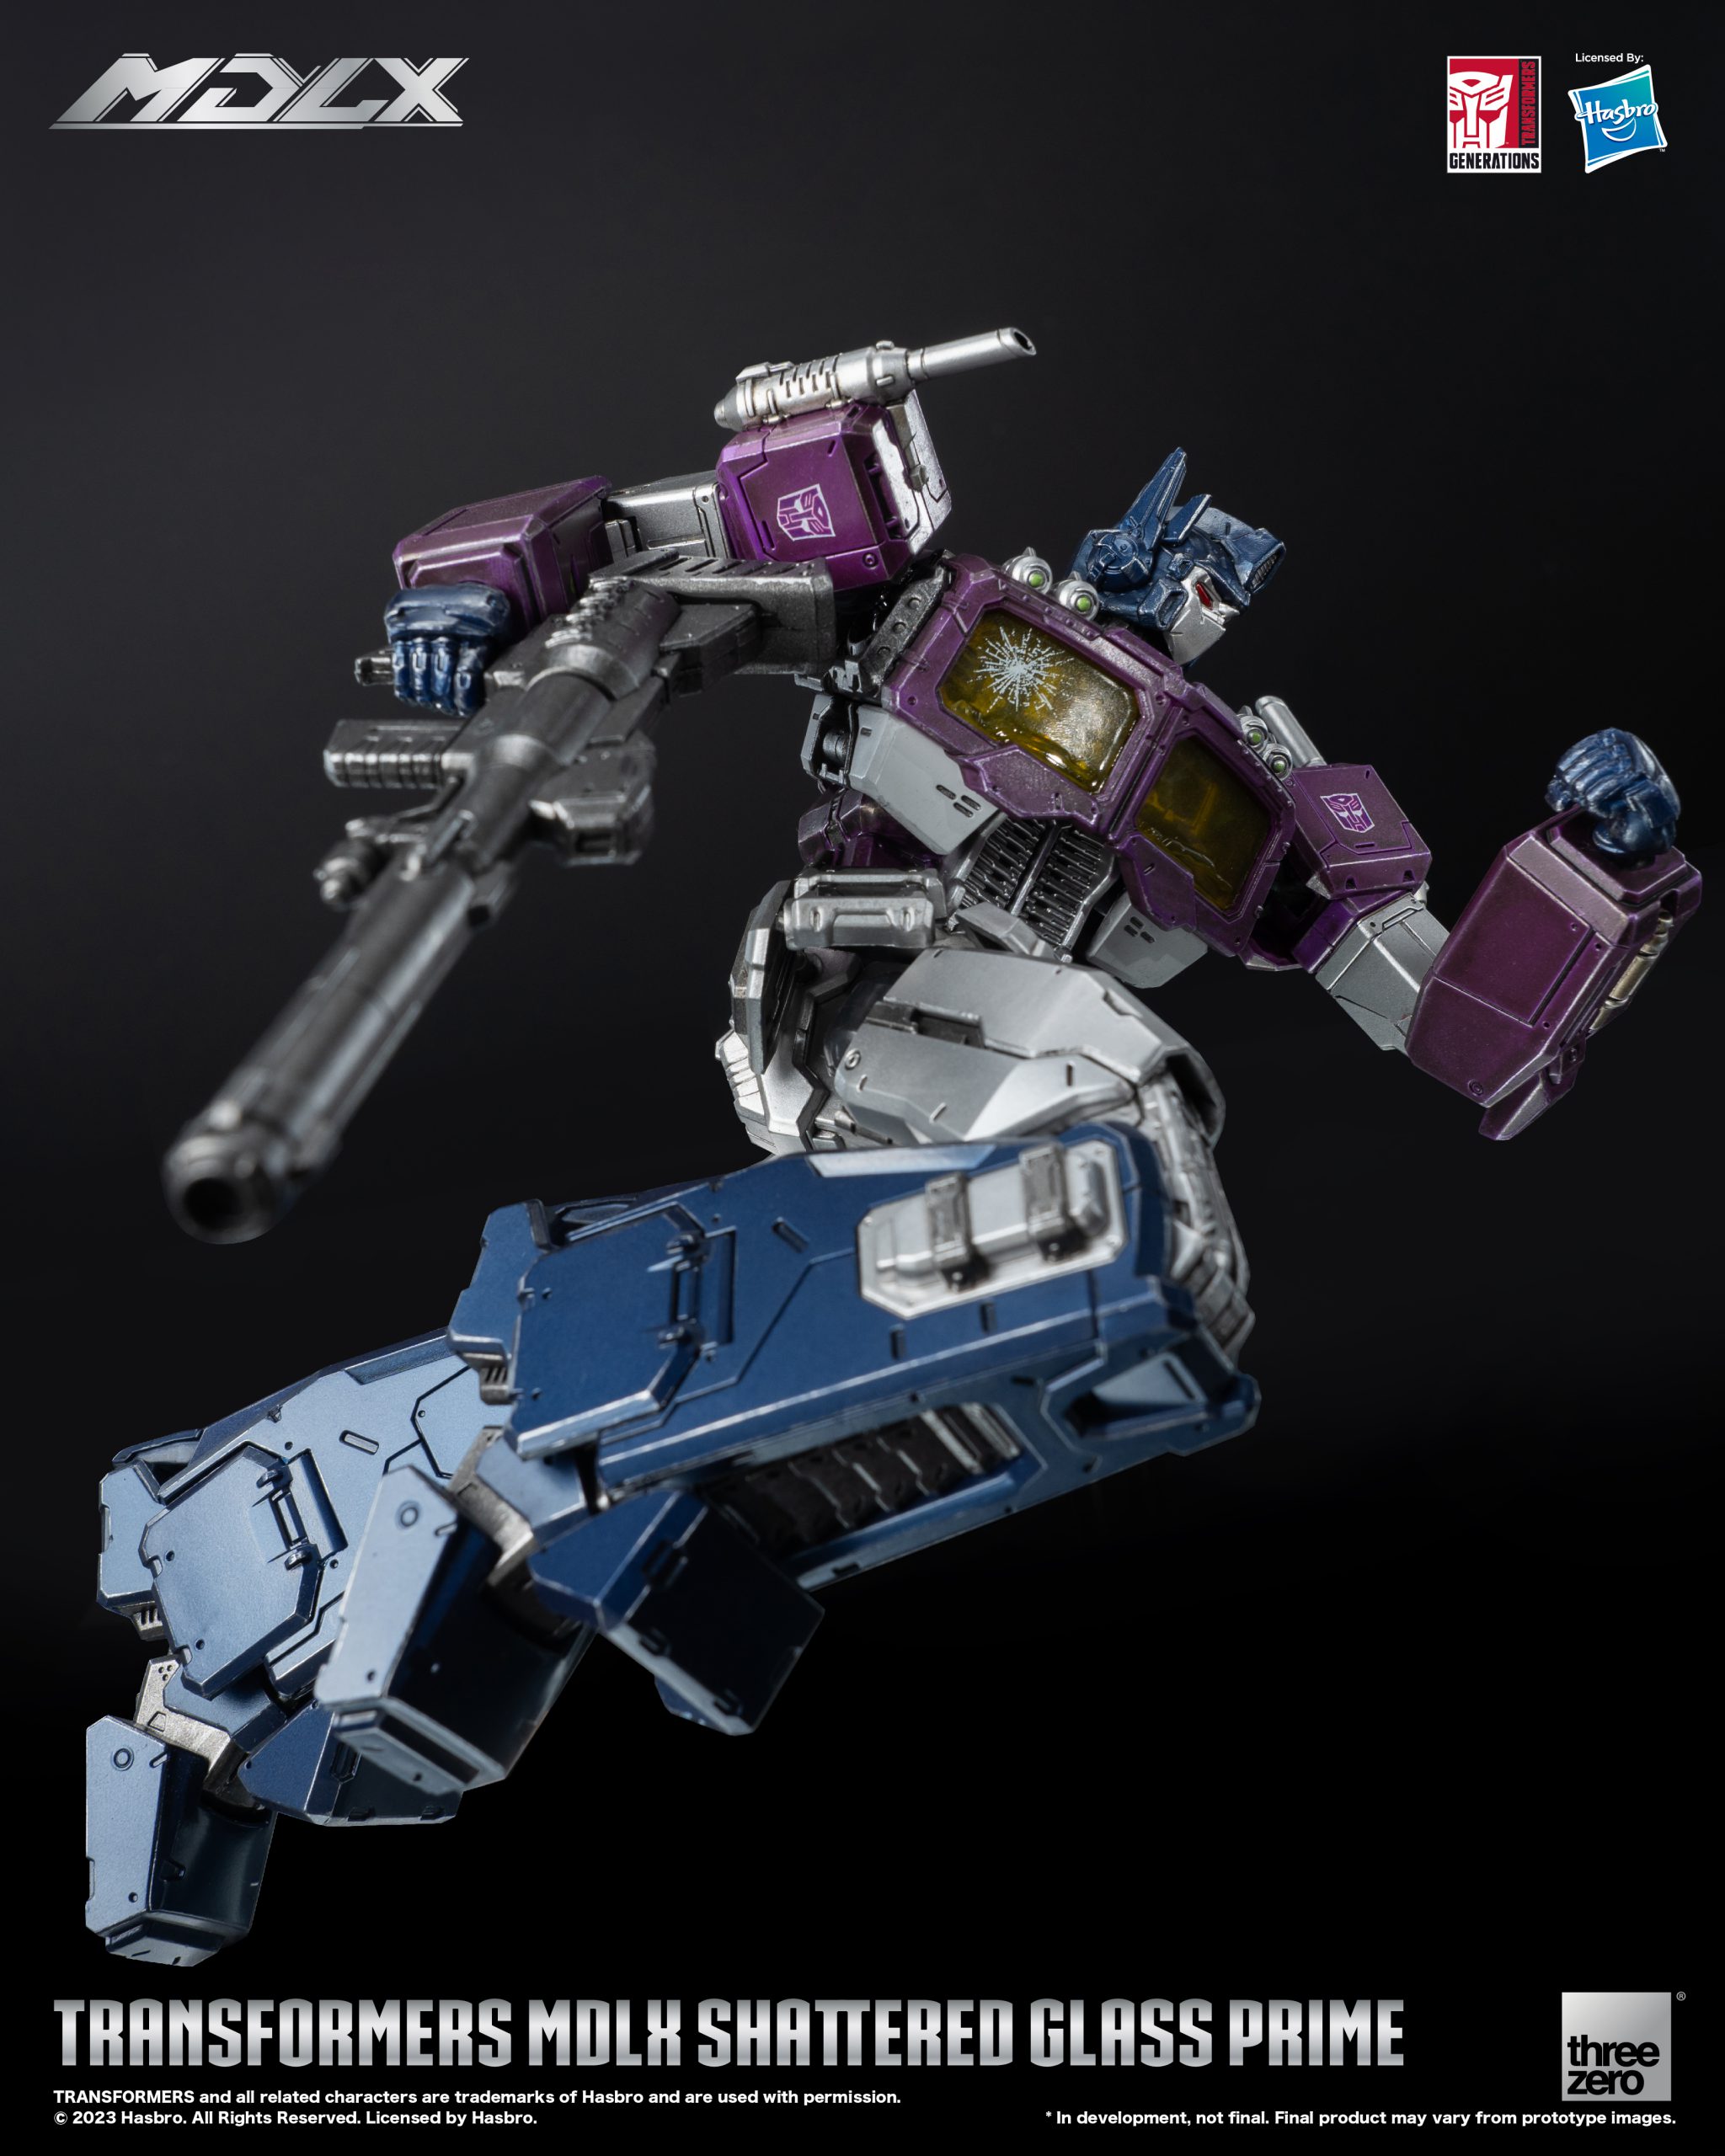 Transformers Generations Shattered Glass Collection Megatron